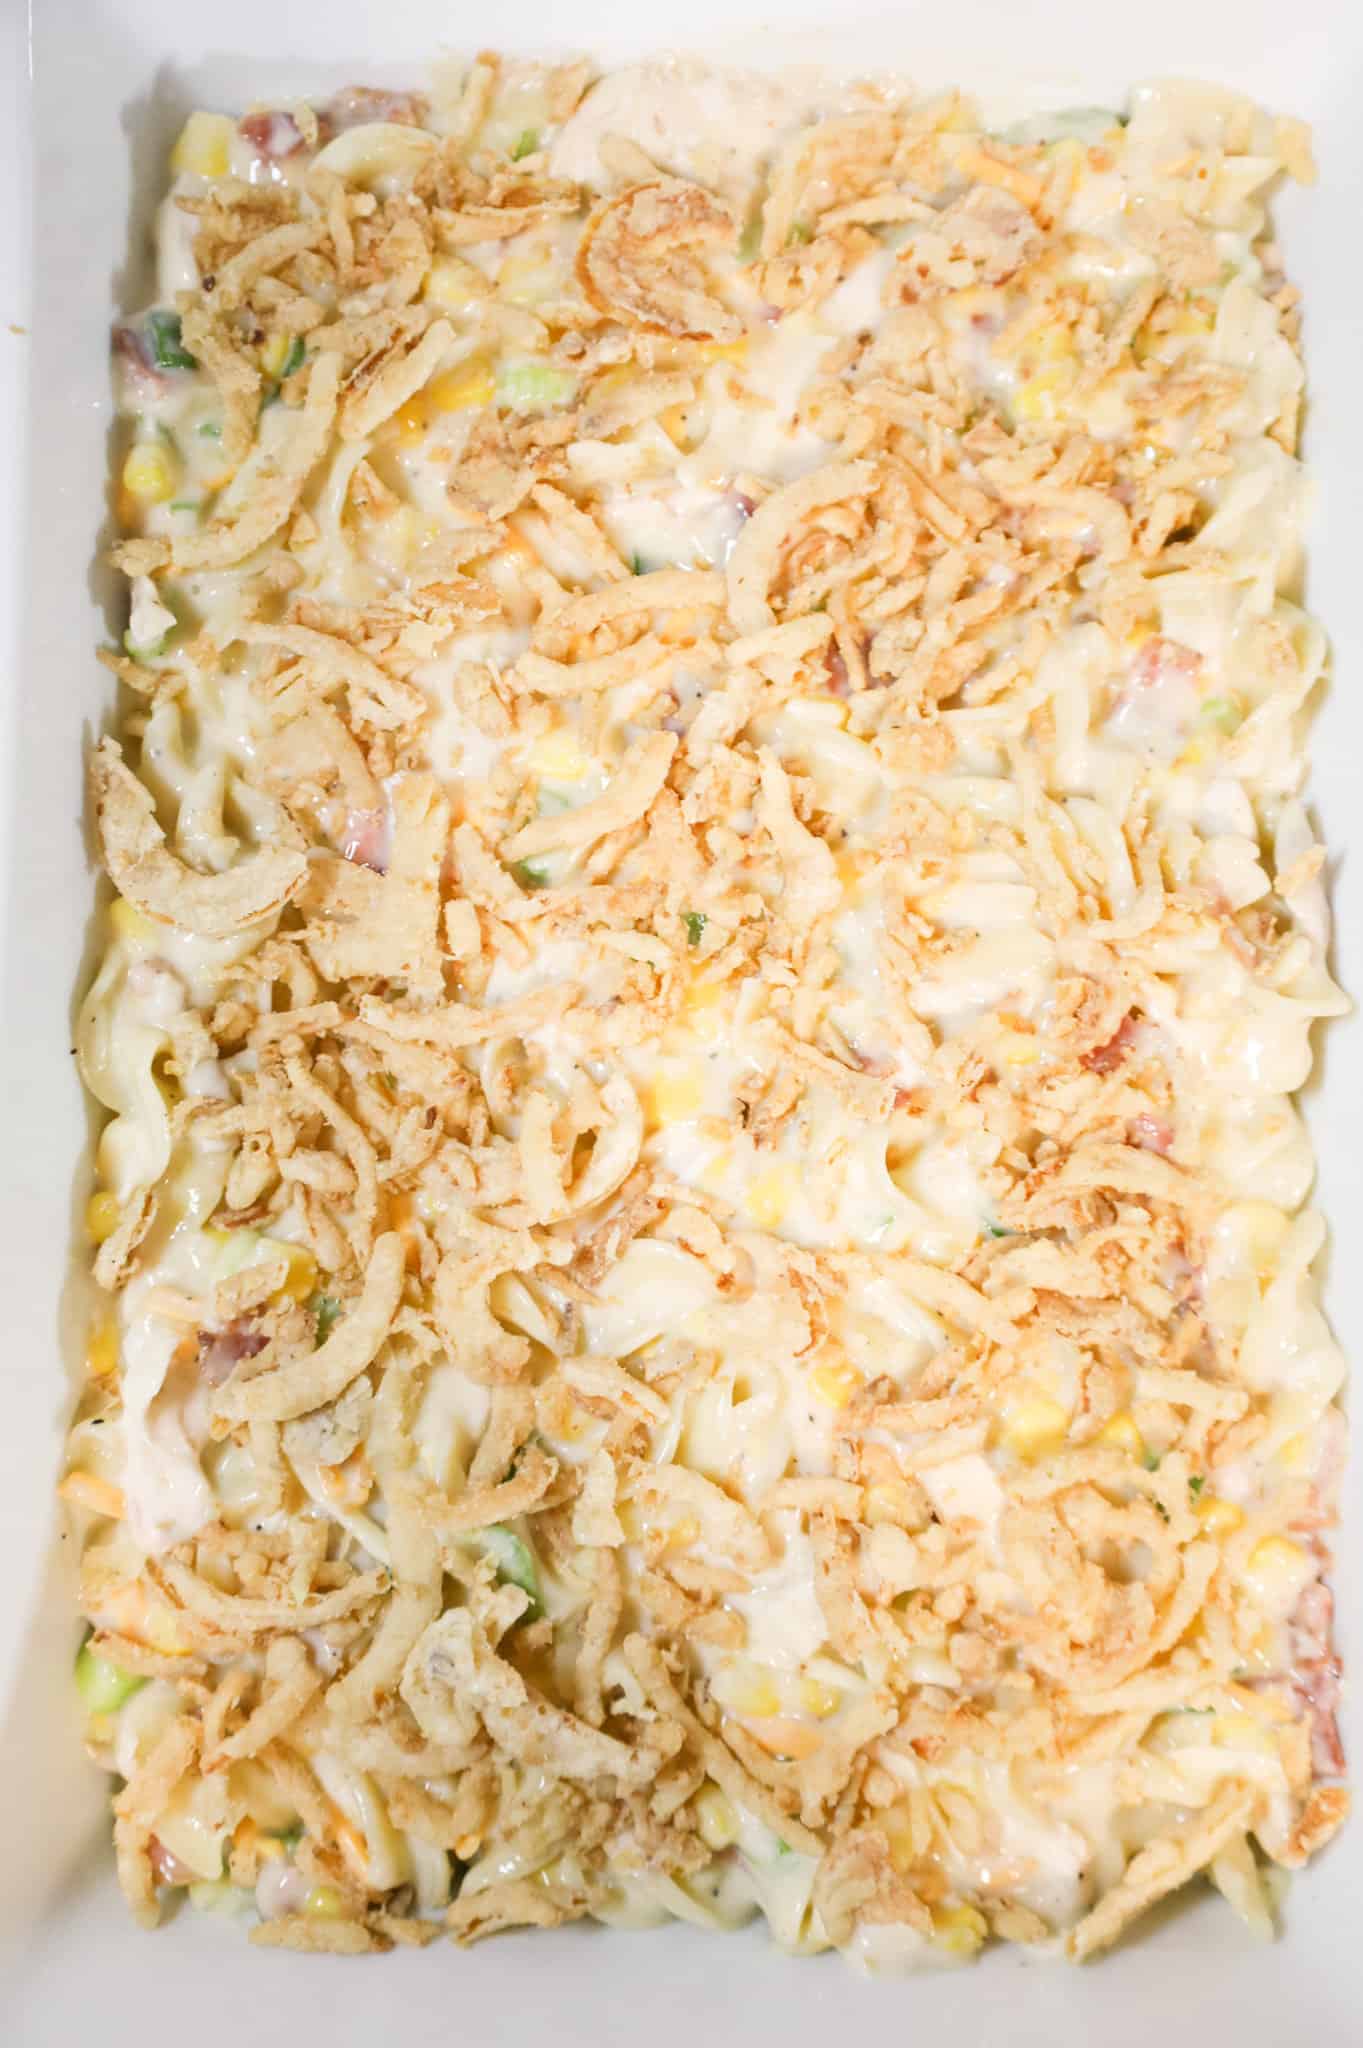 French's crispy fried onions on top of creamy chicken noodle mixture in a casserole dish